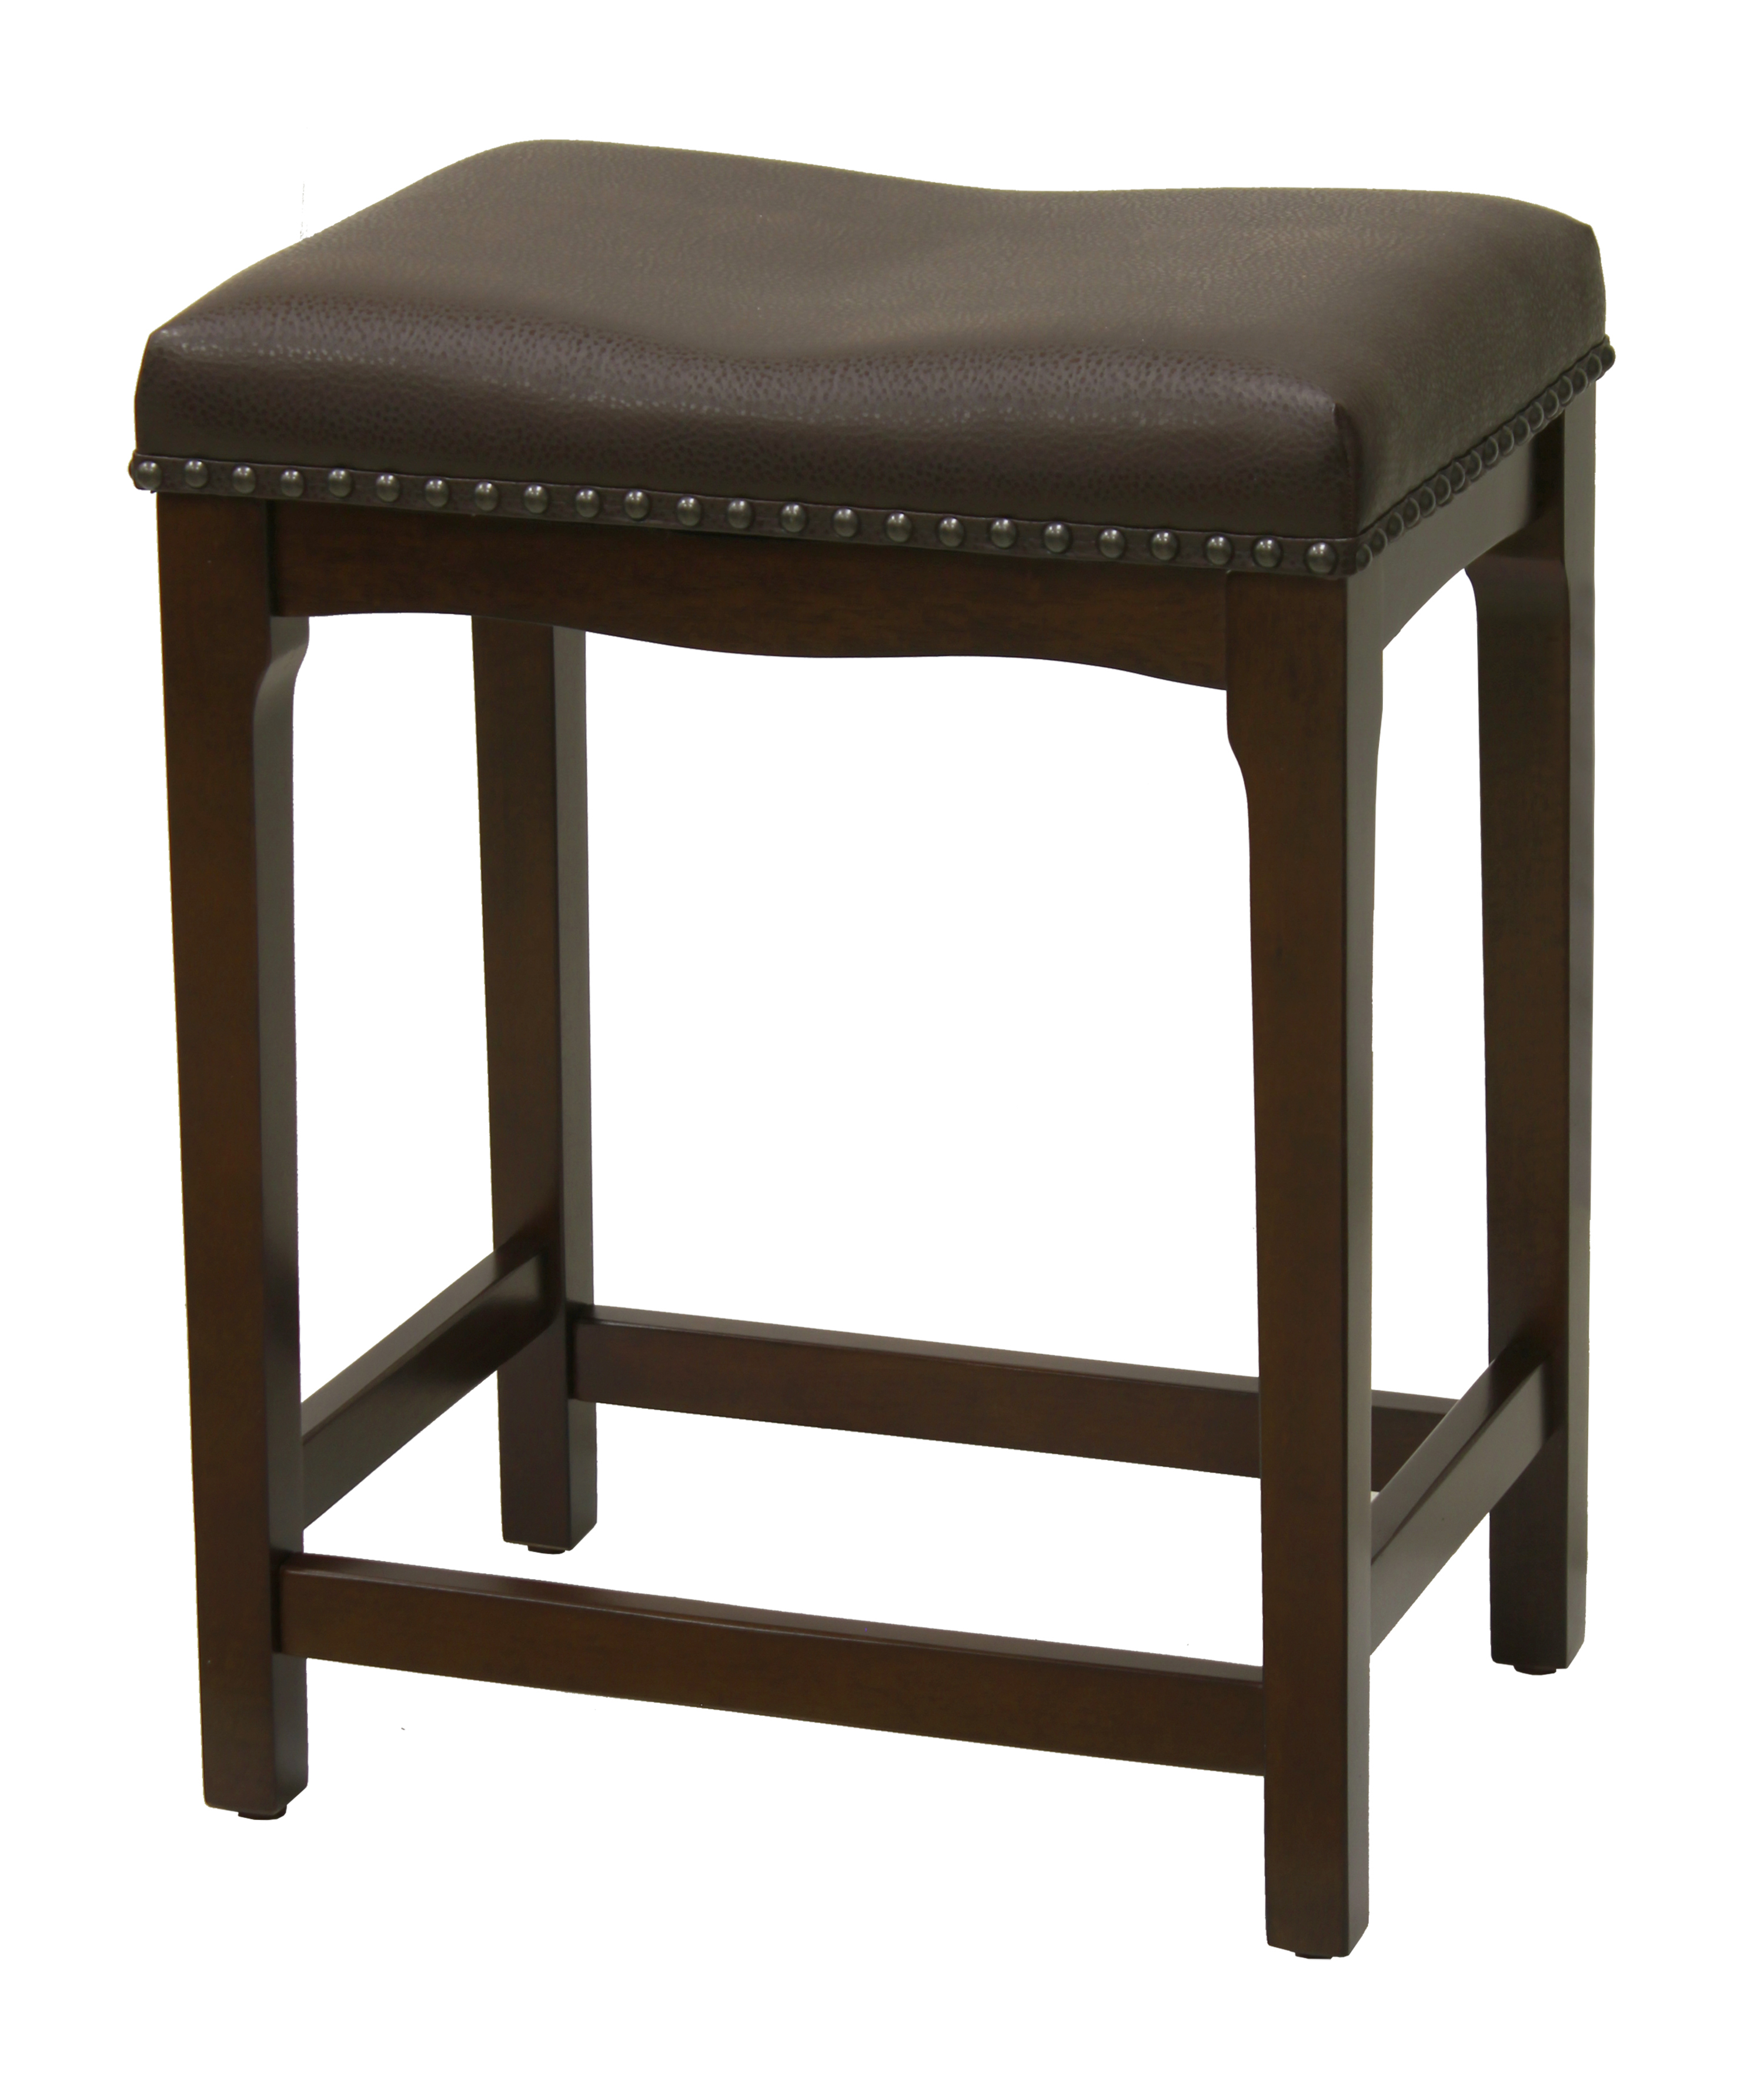 Better Homes & Gardens Brown Faux Leather Wayne 24" Saddle Bar Stool - image 1 of 2